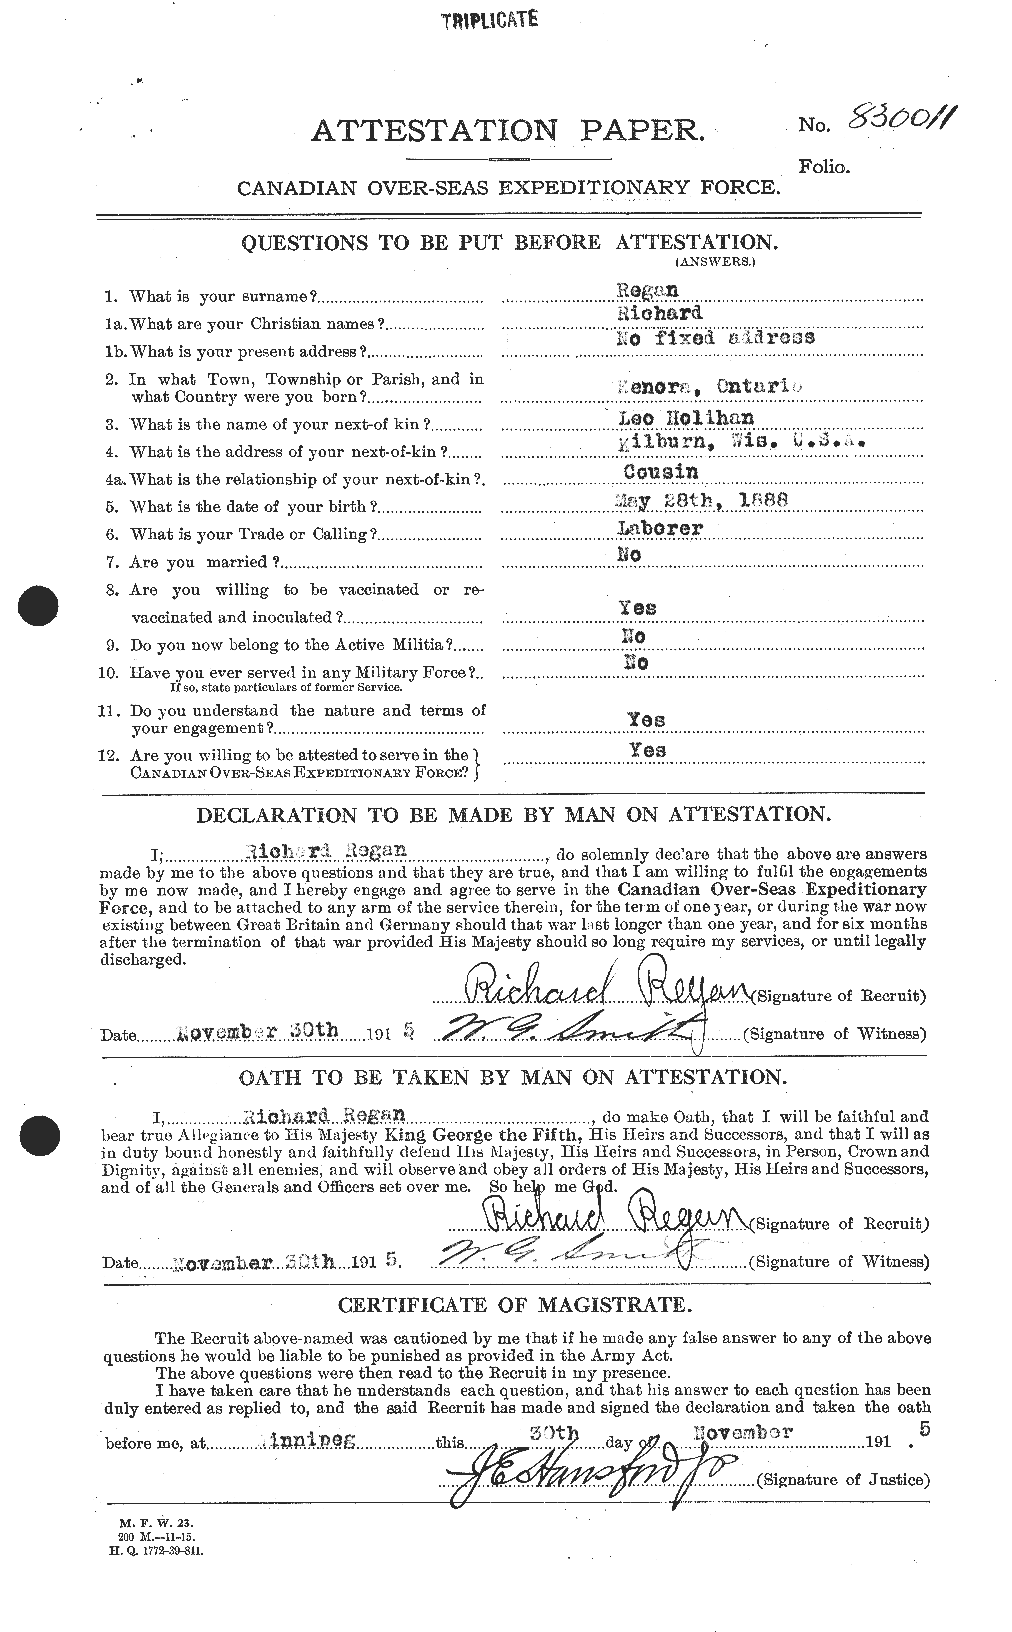 Personnel Records of the First World War - CEF 597610a